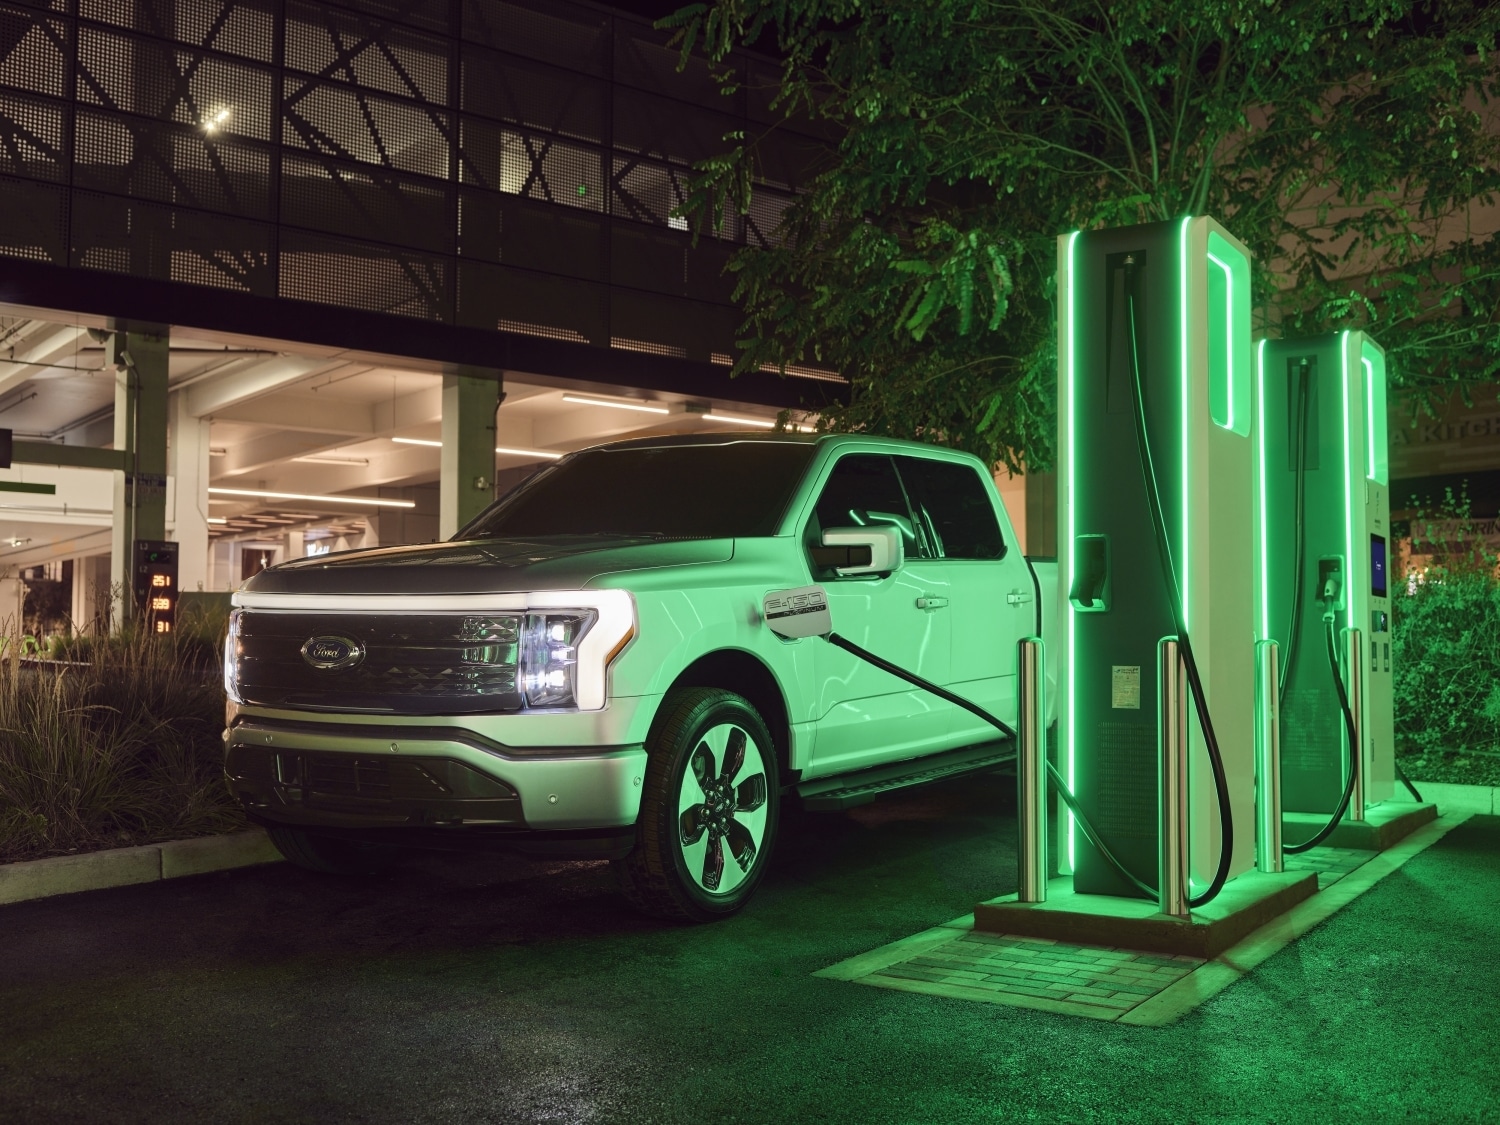 Electrify America Opens its 200th Electric Vehicle Charging Station in California at Westfield Valley Fair in Santa Clara